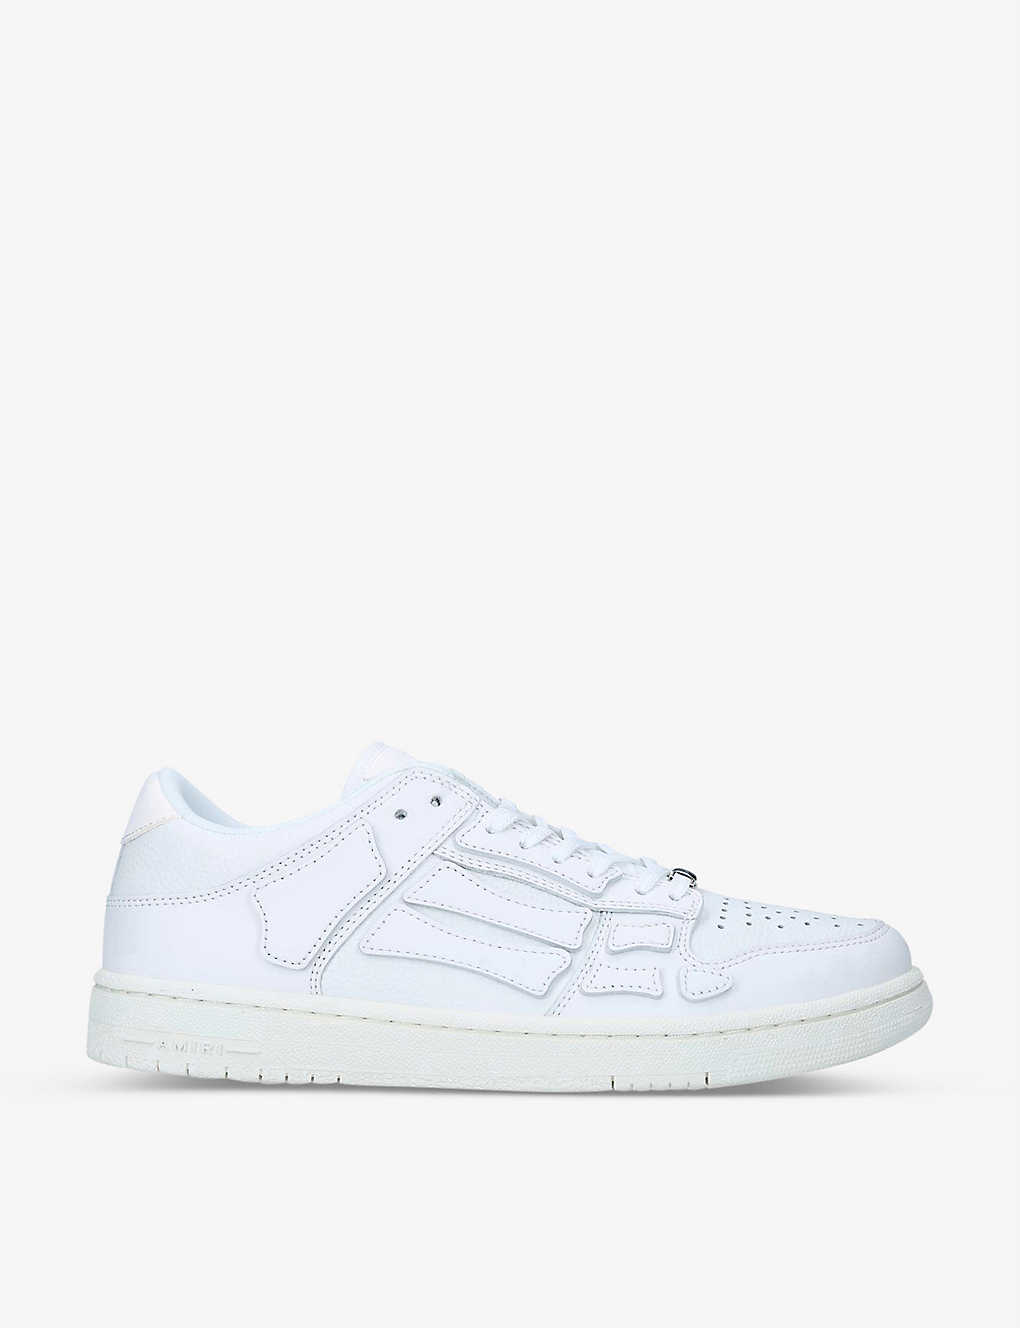 Shop Amiri Men's White Skel-top Low-top Leather Trainers